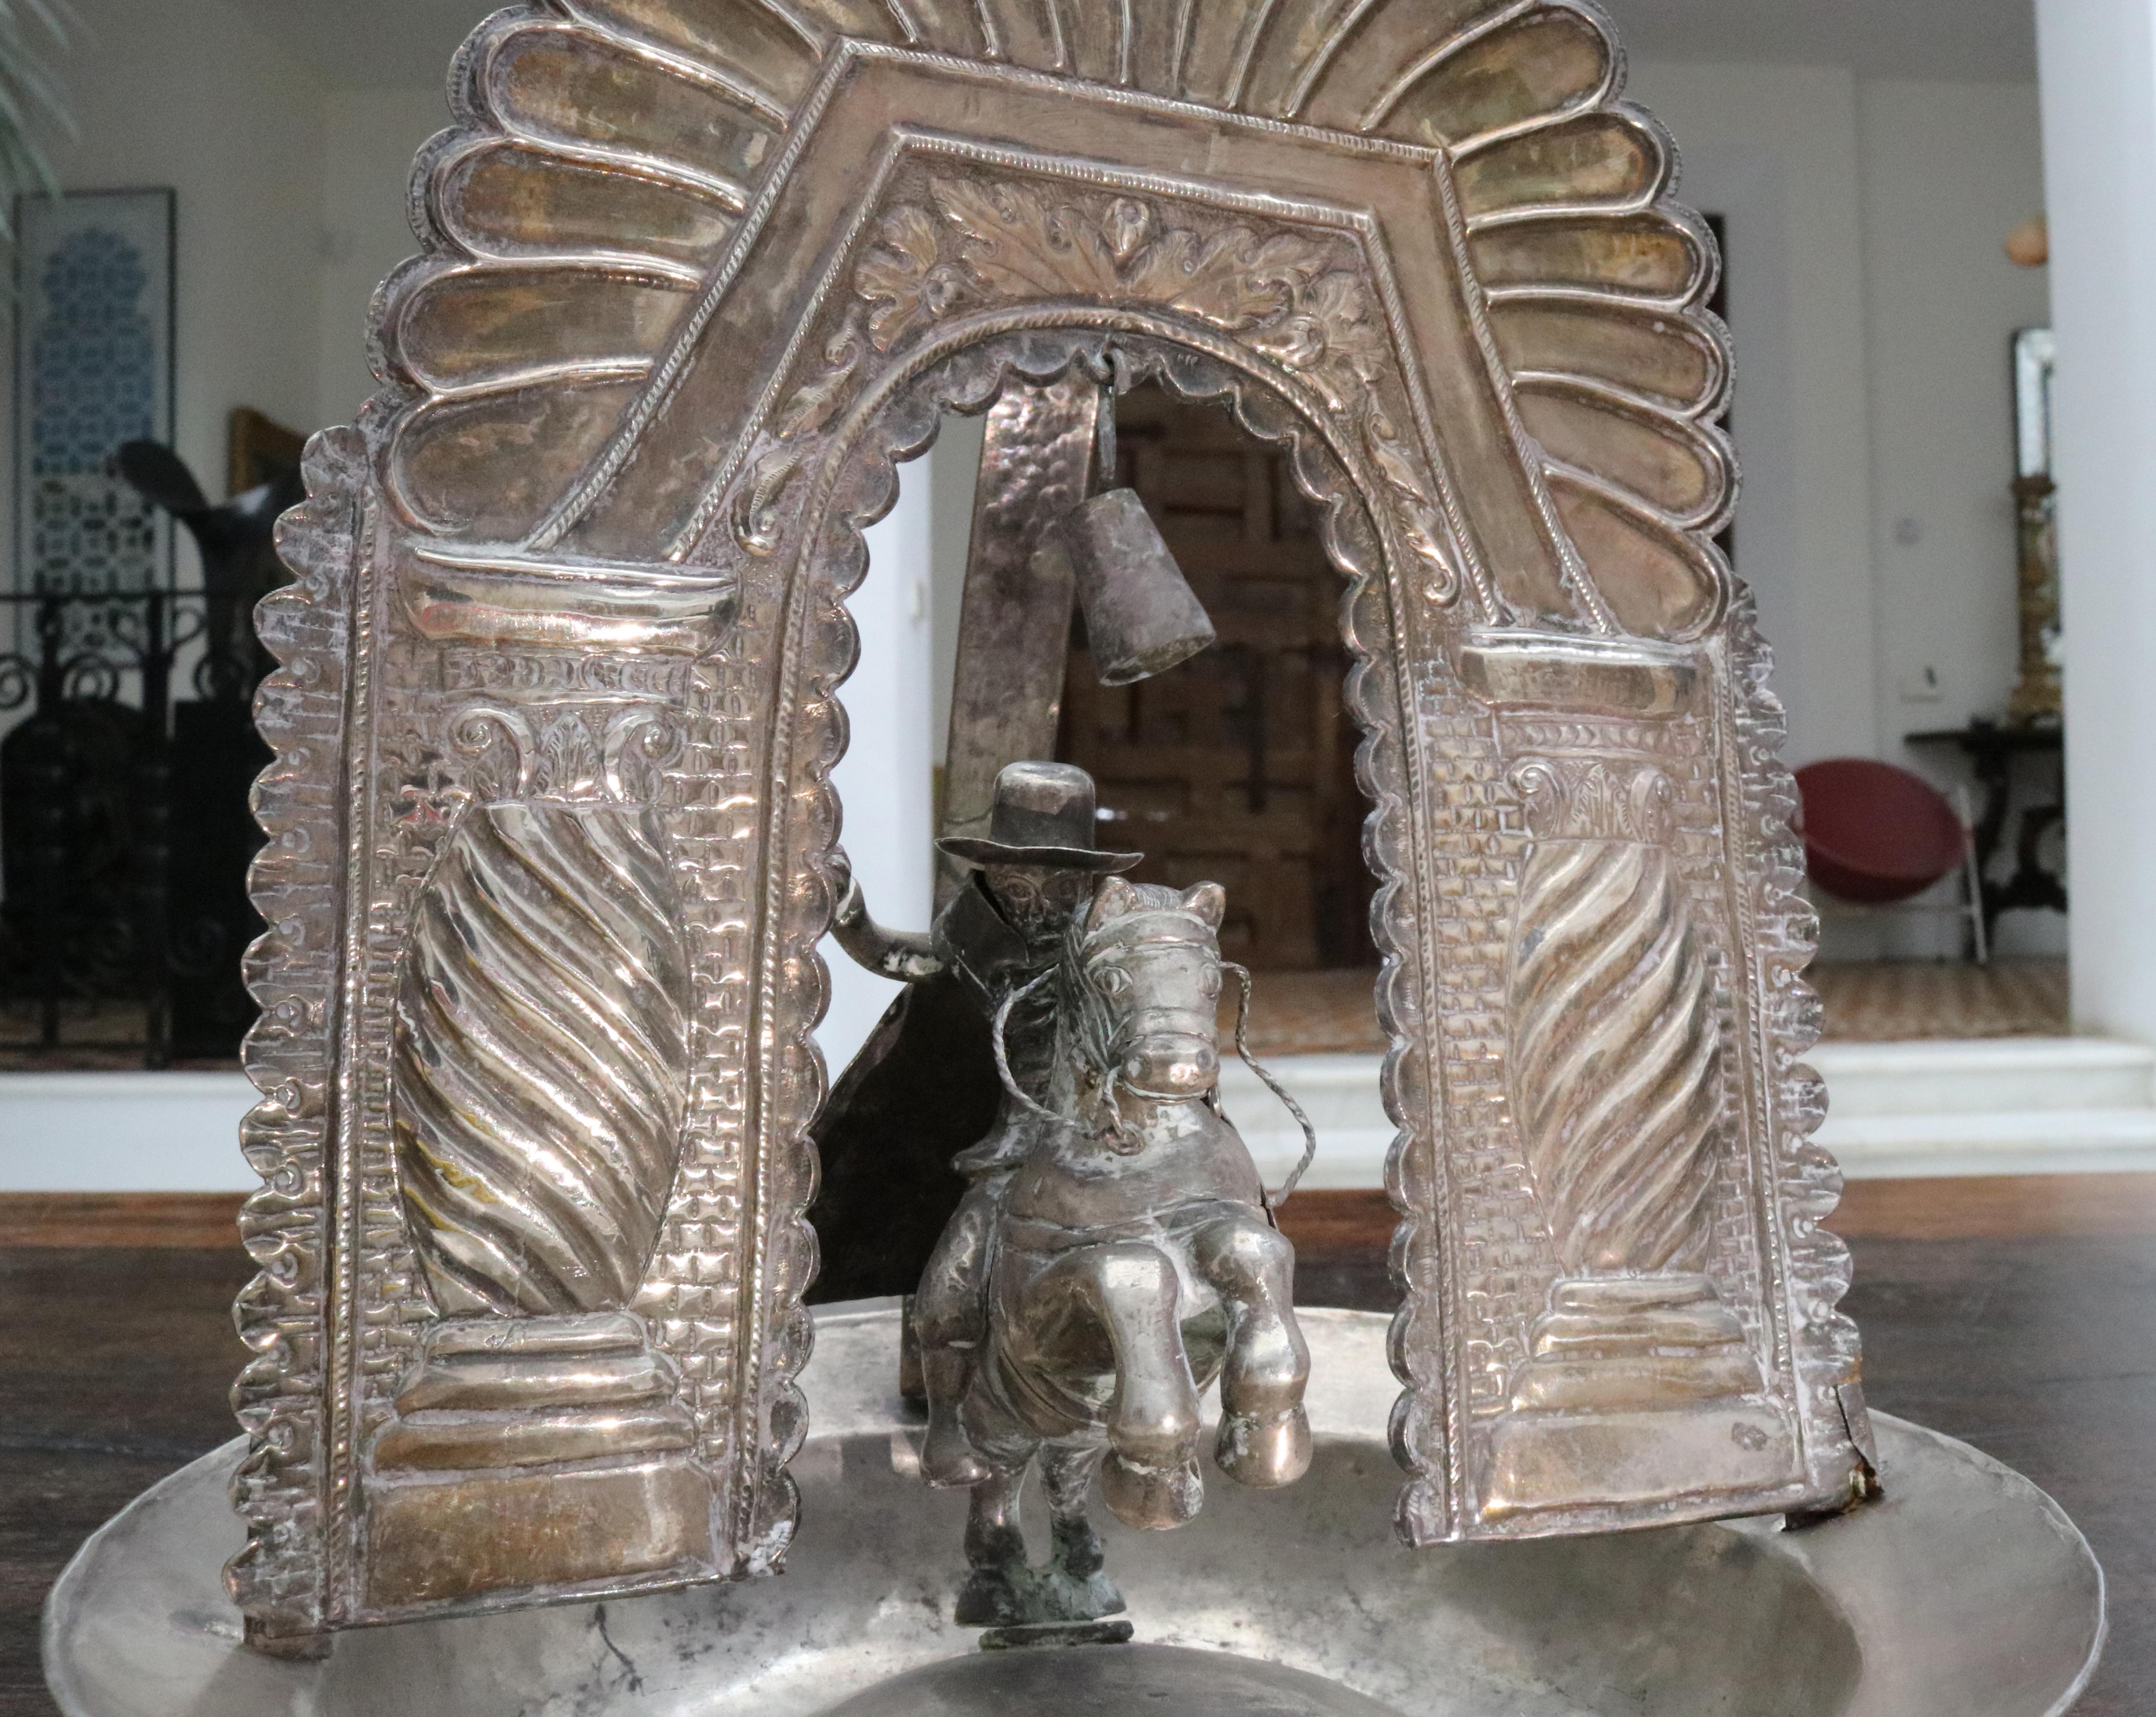 19th Century Bolivian or Peruvian Silver Alms Dish with Saint James on a Horse 9